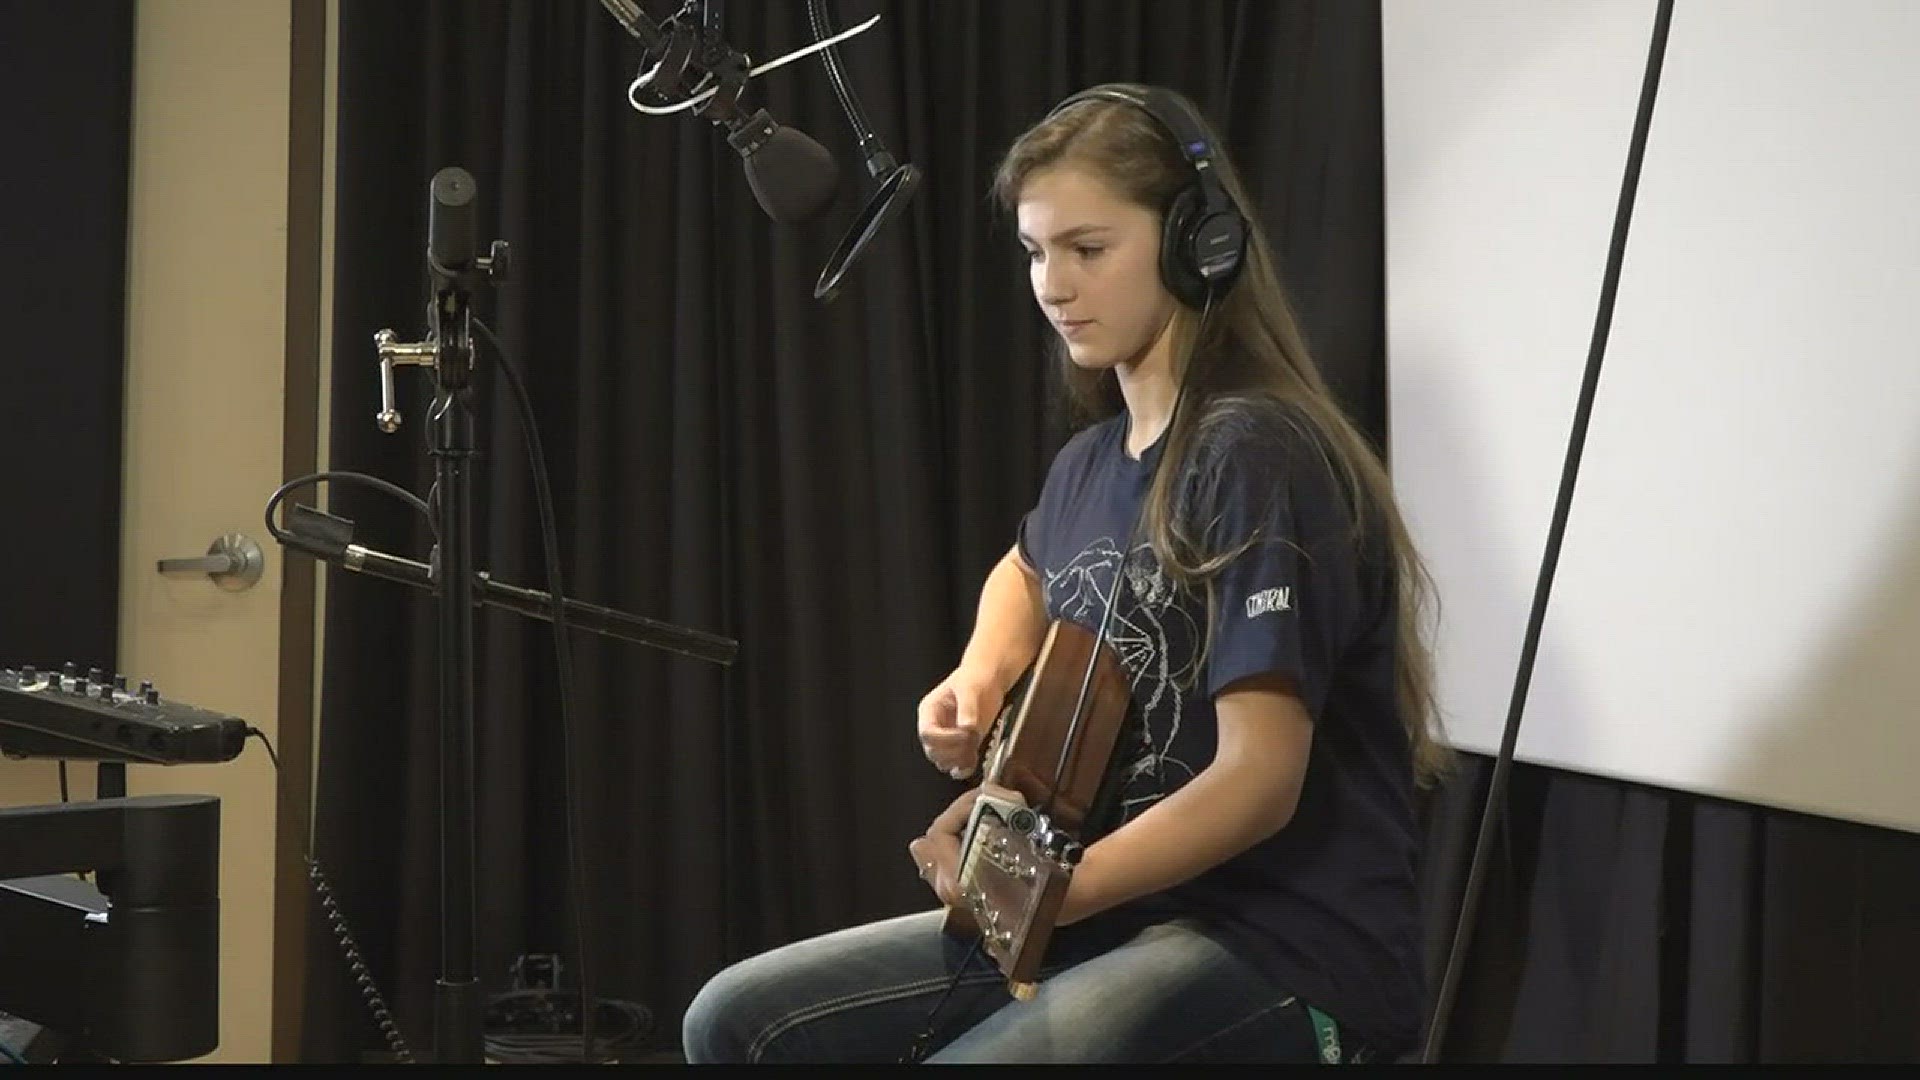 Local girl writes song to honor Freeman Community (9-19-17)